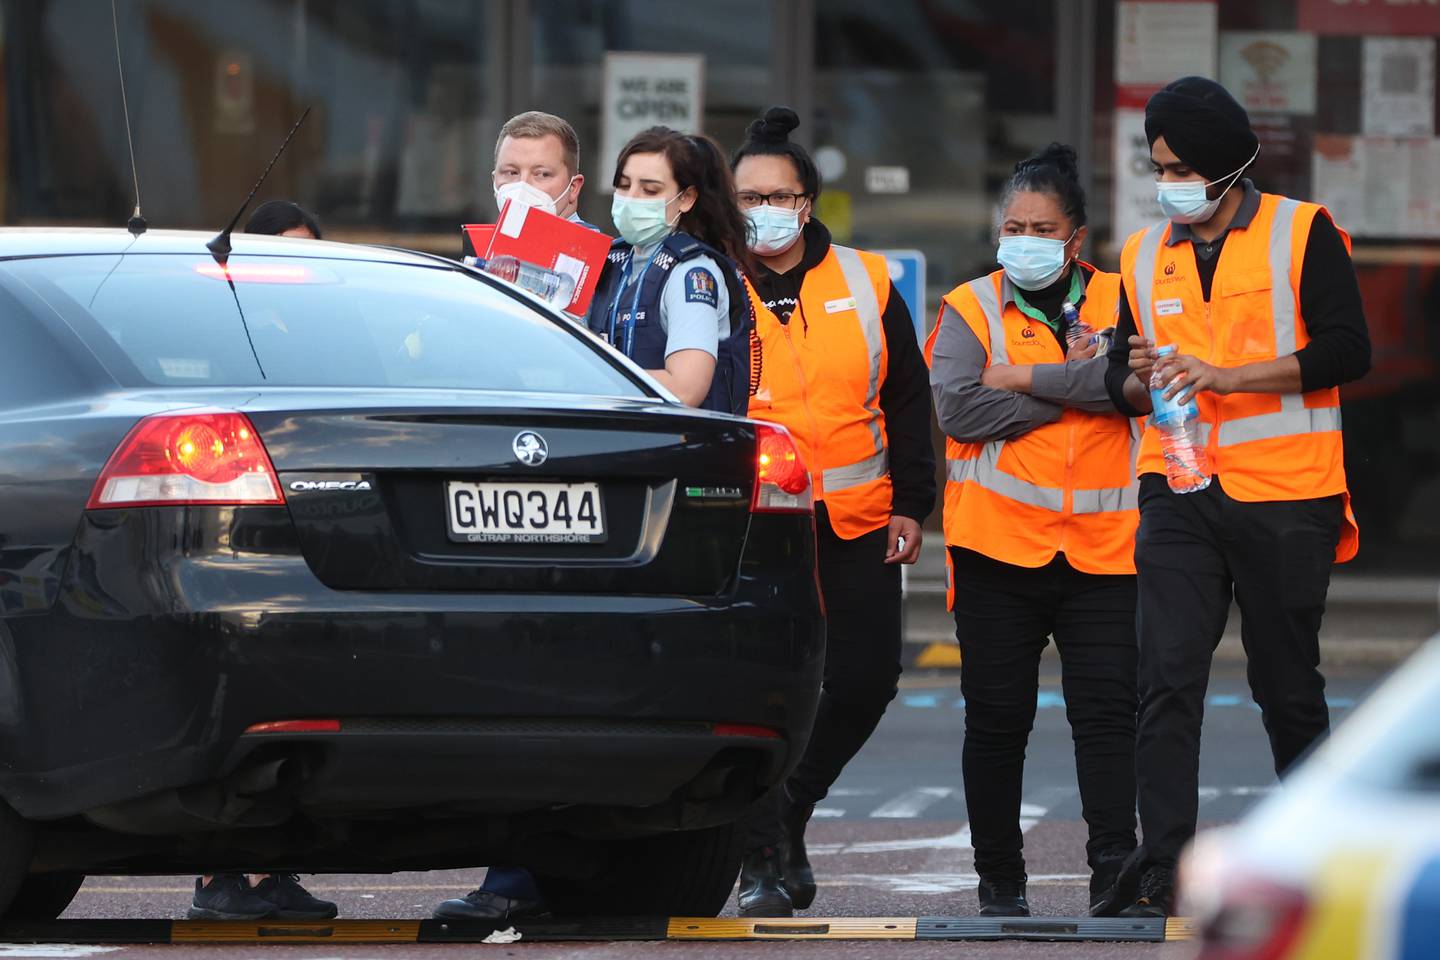 Employees of the Countdown mall in New Lynn, Auckland, wait to leave with police after a stabbing attack on September 3, 2021. Getty Images